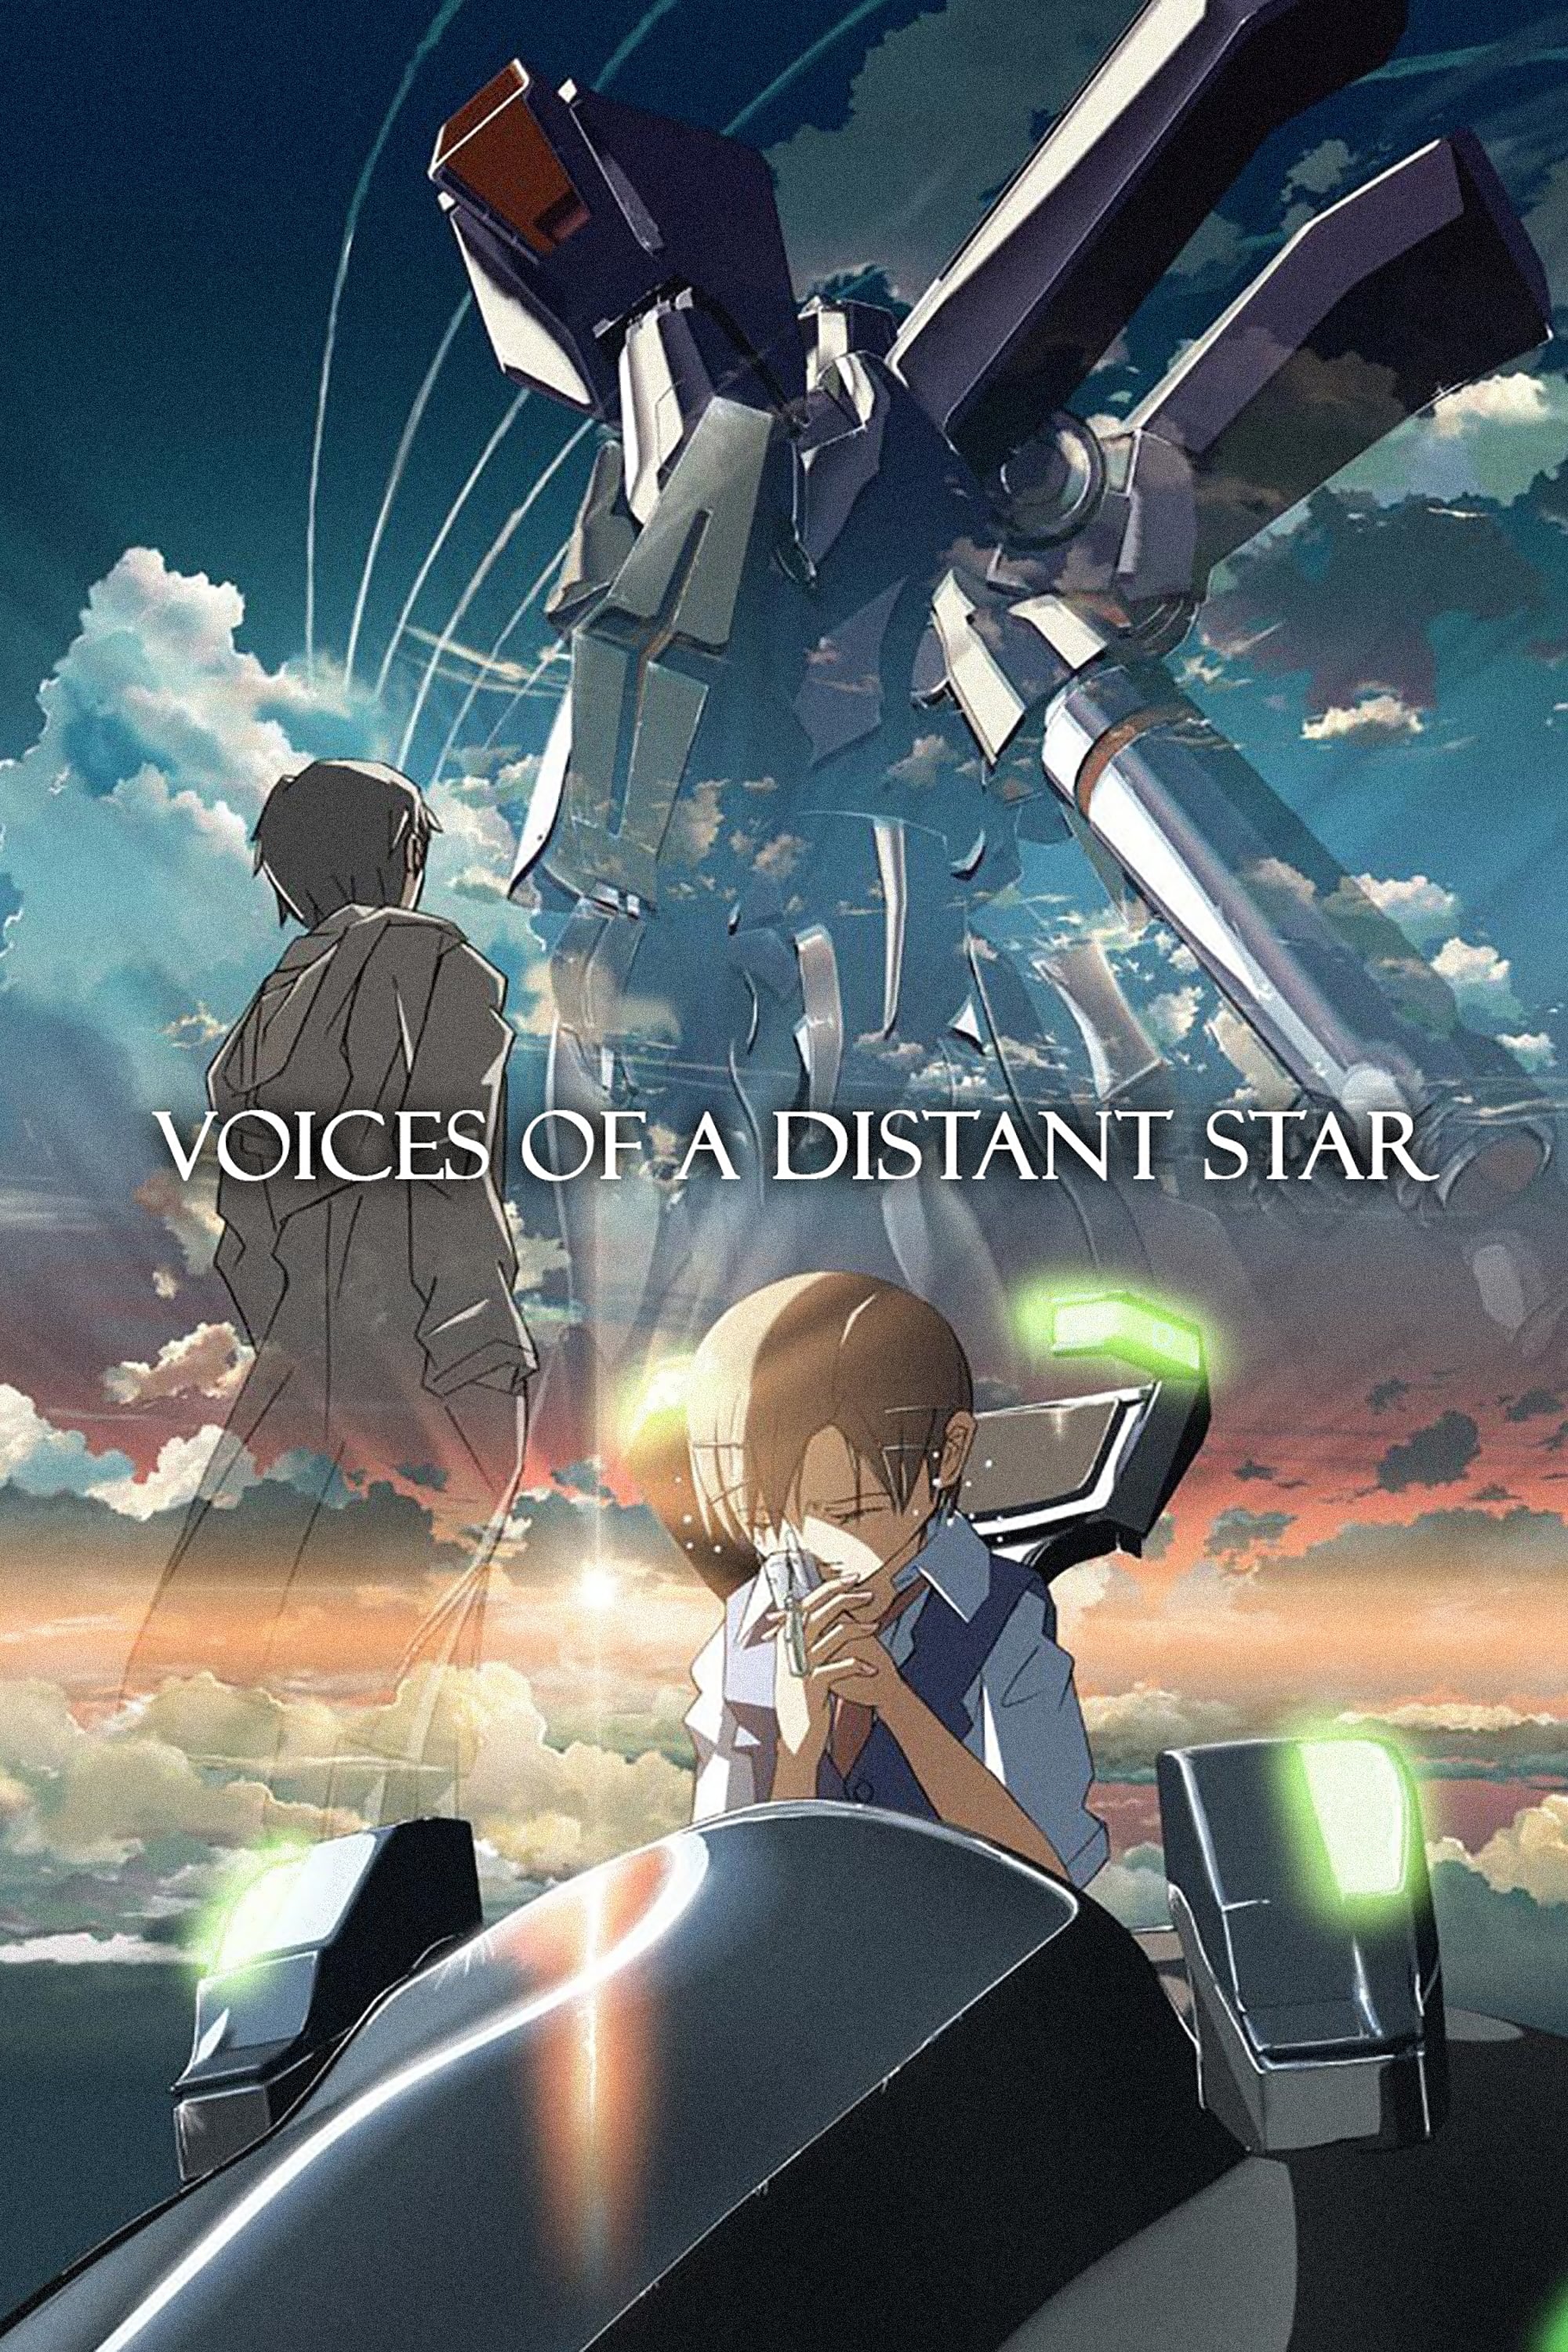 The Voices of a Distant Star (2002)